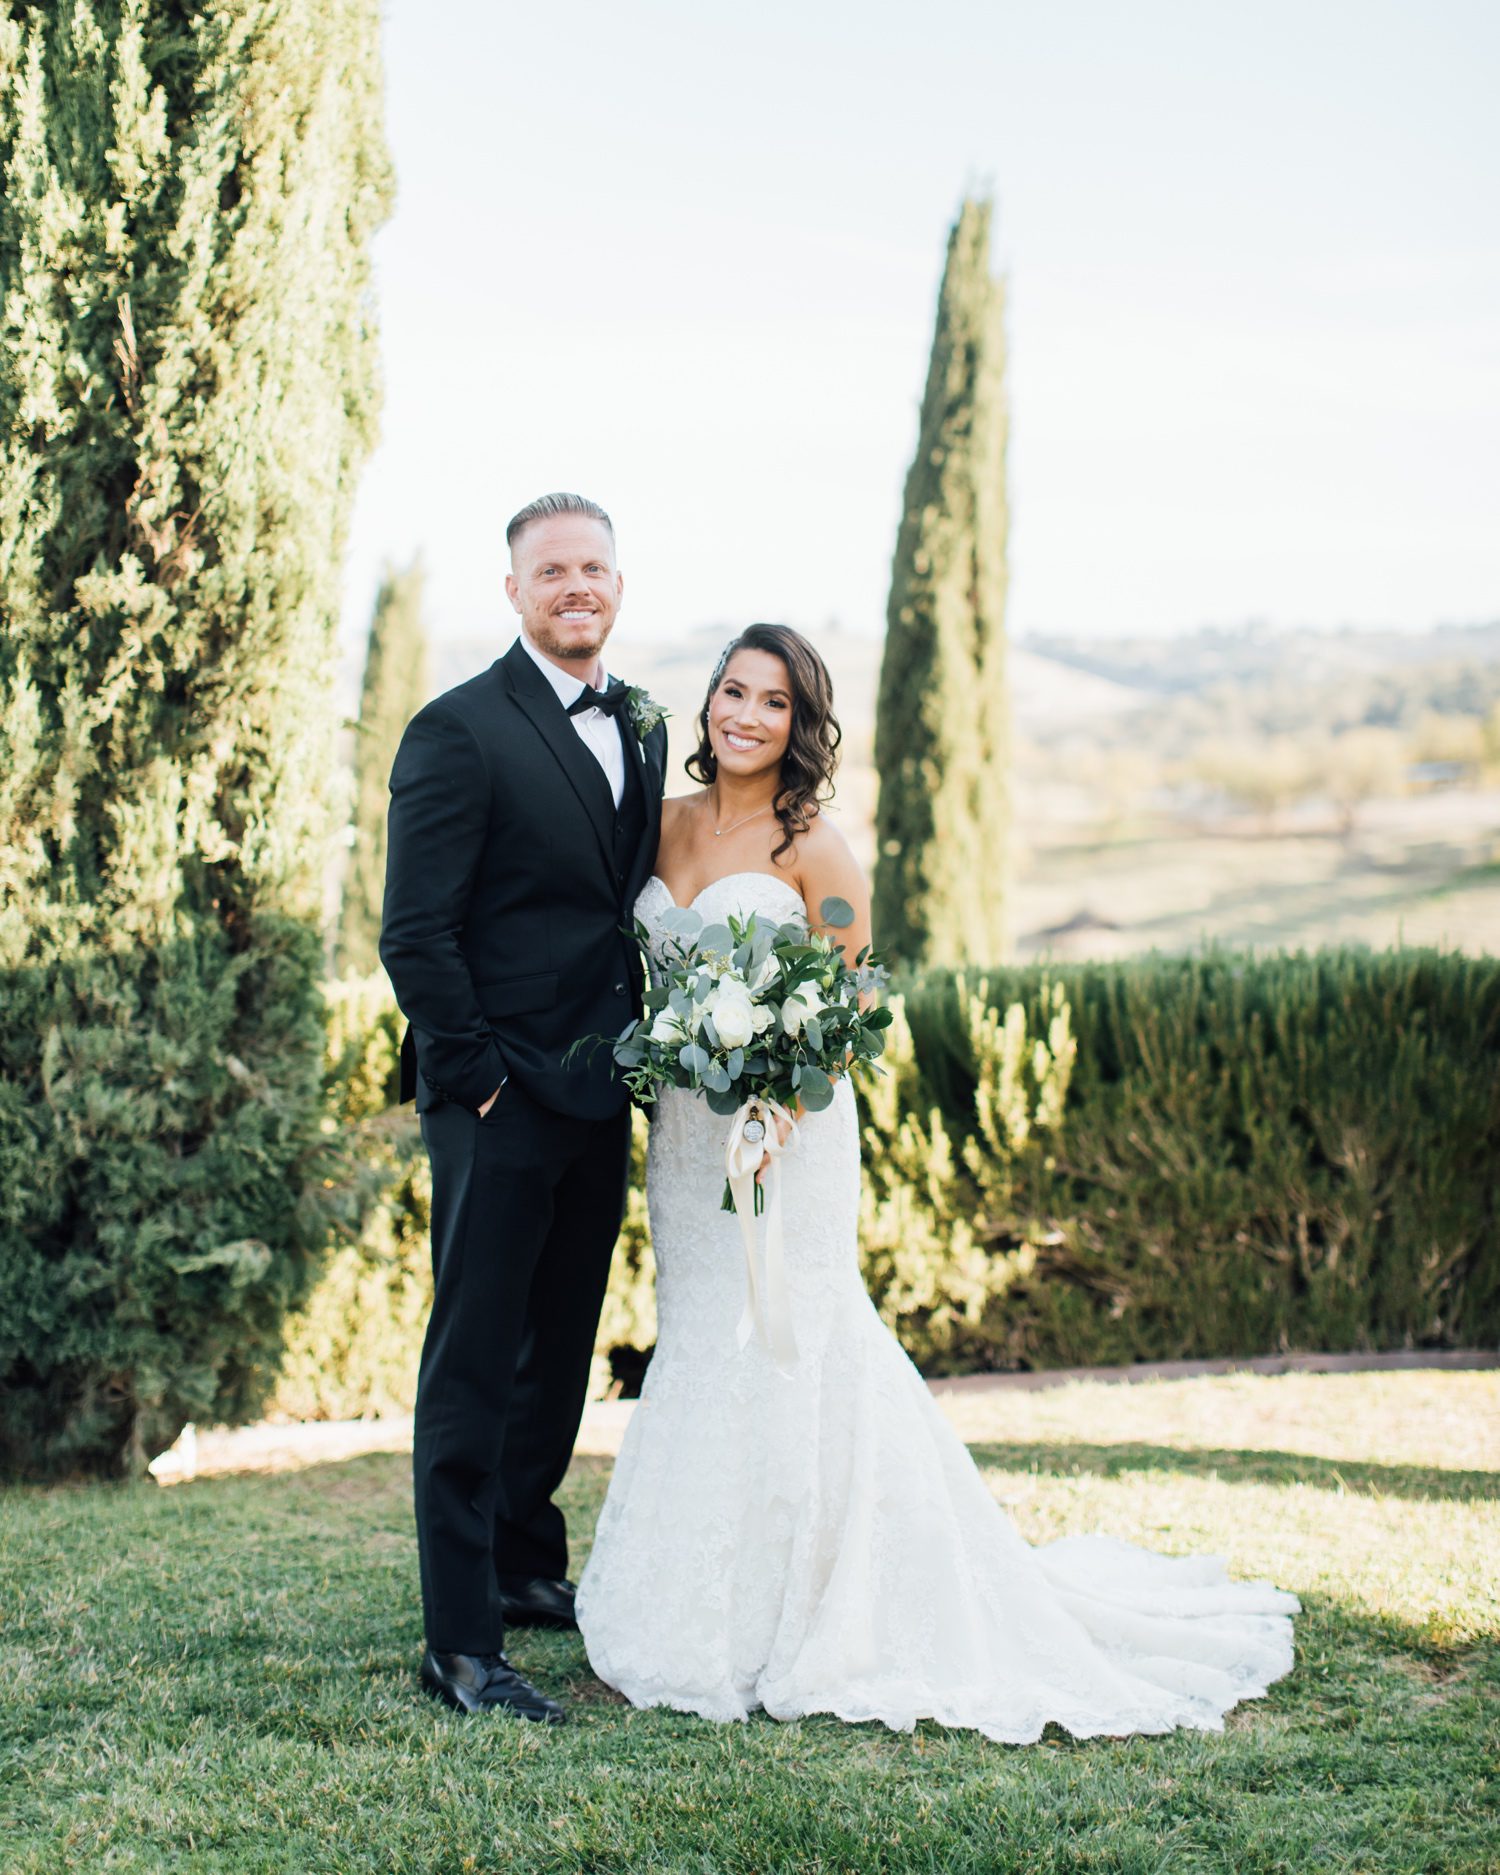 Bride and groom at Italy inspired wedding venue in Paso Robles california